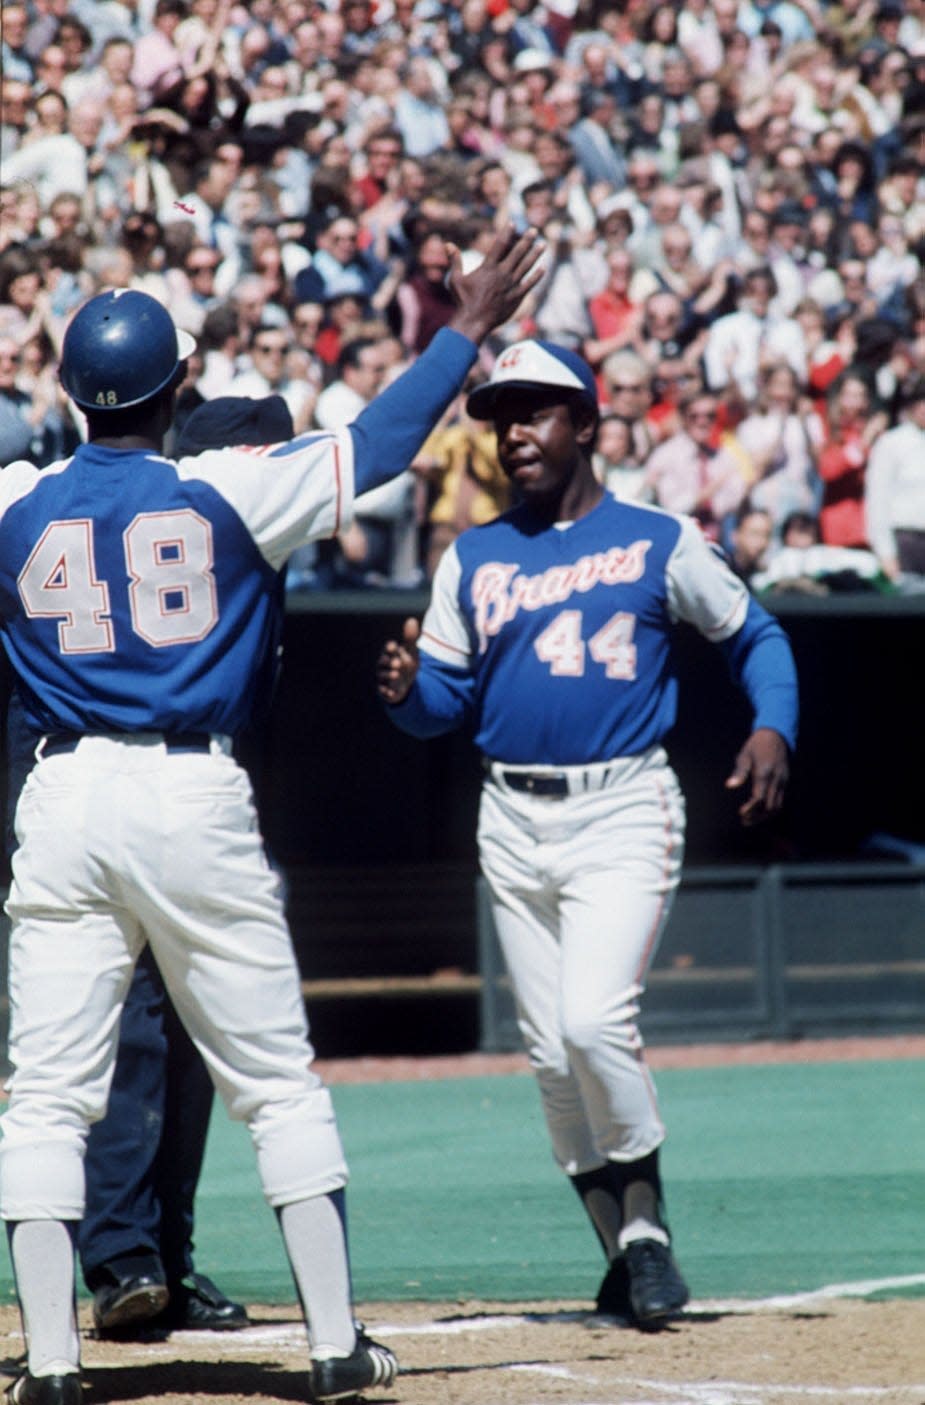 Hank Aaron crosses home plate after bashing home run No. 714 at Riverfront Stadium to tie Babe Ruth’s record, April 4, 1974. The Enquirer/Bob Free